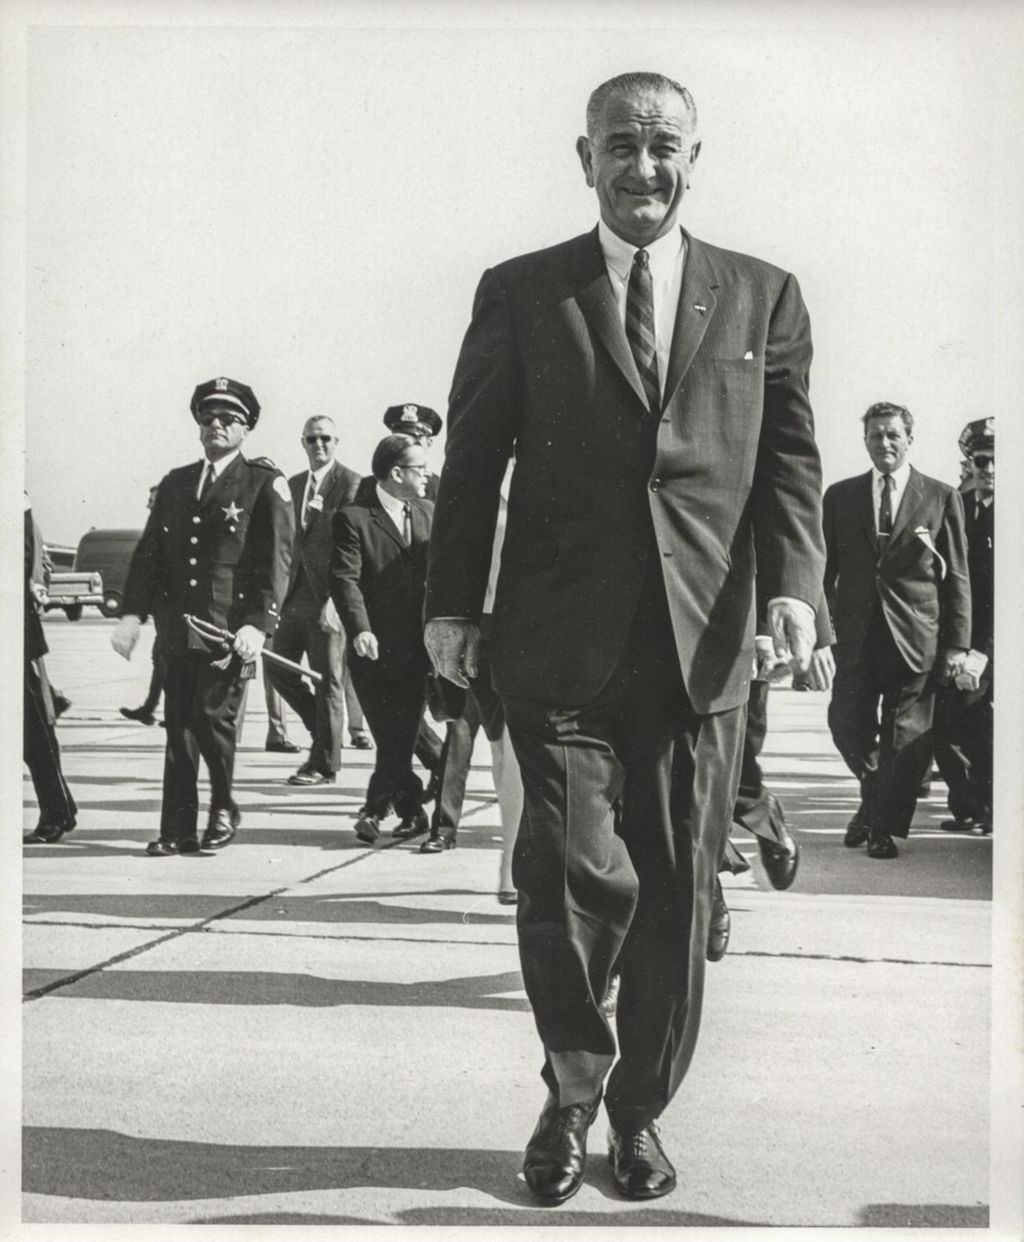 Miniature of Lyndon B. Johnson at the airport in Chicago